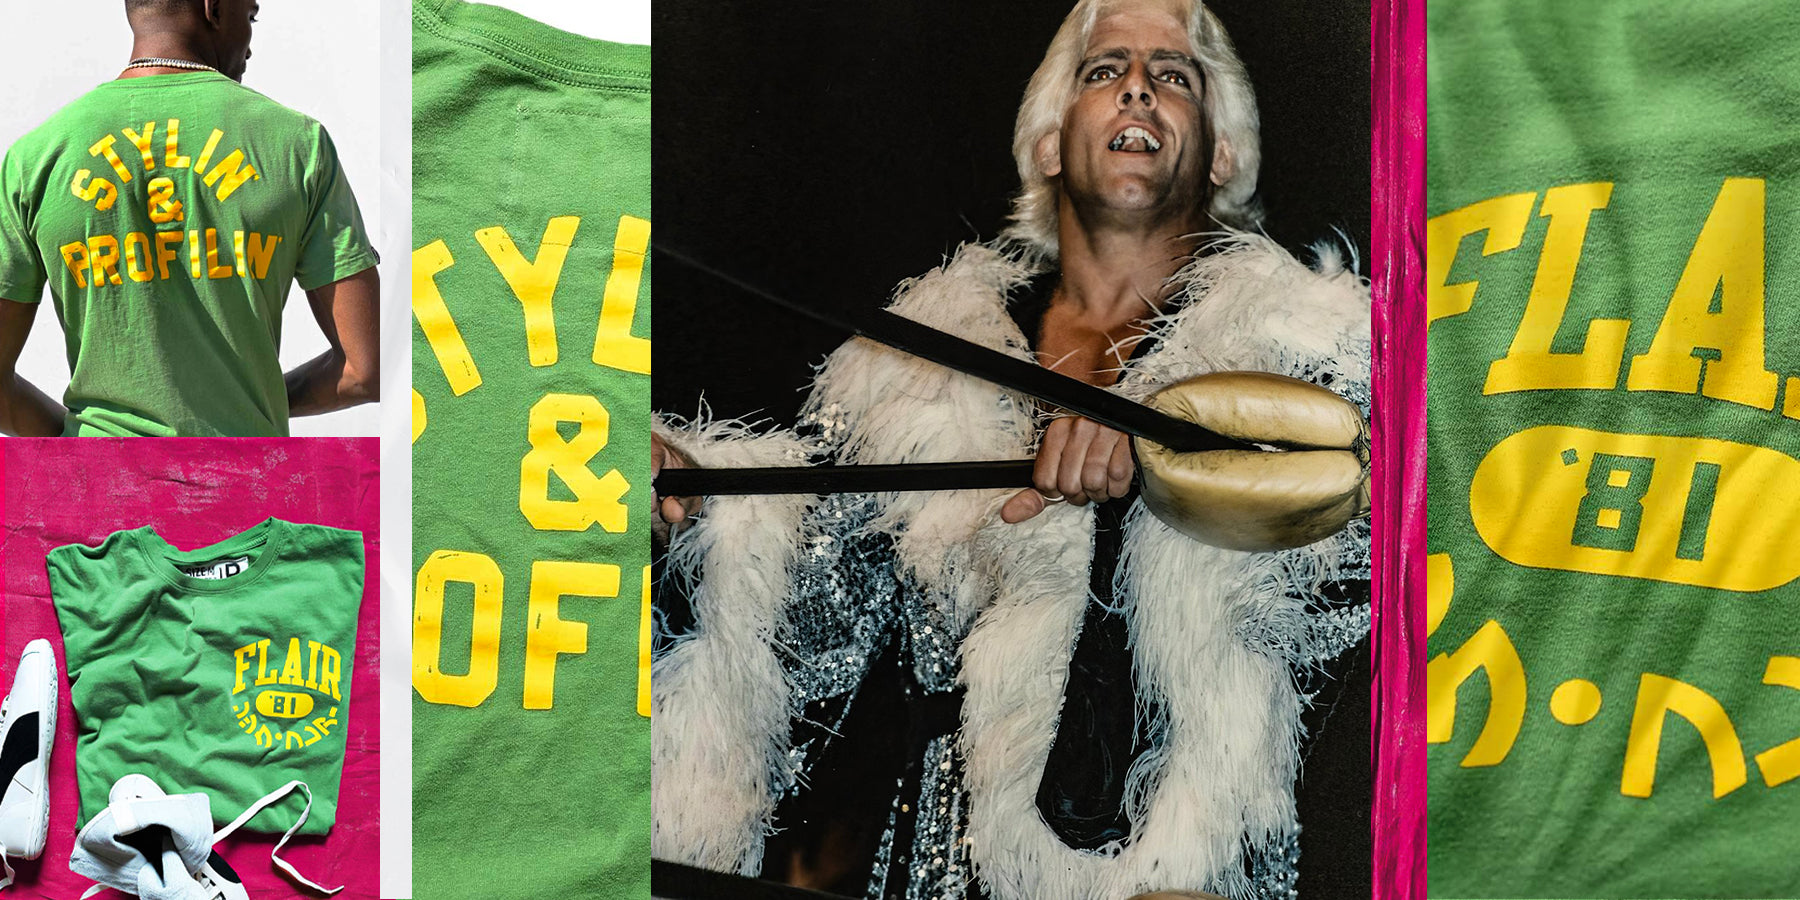 Collage of wrestling-themed clothing and a wrestler posing with a prop.